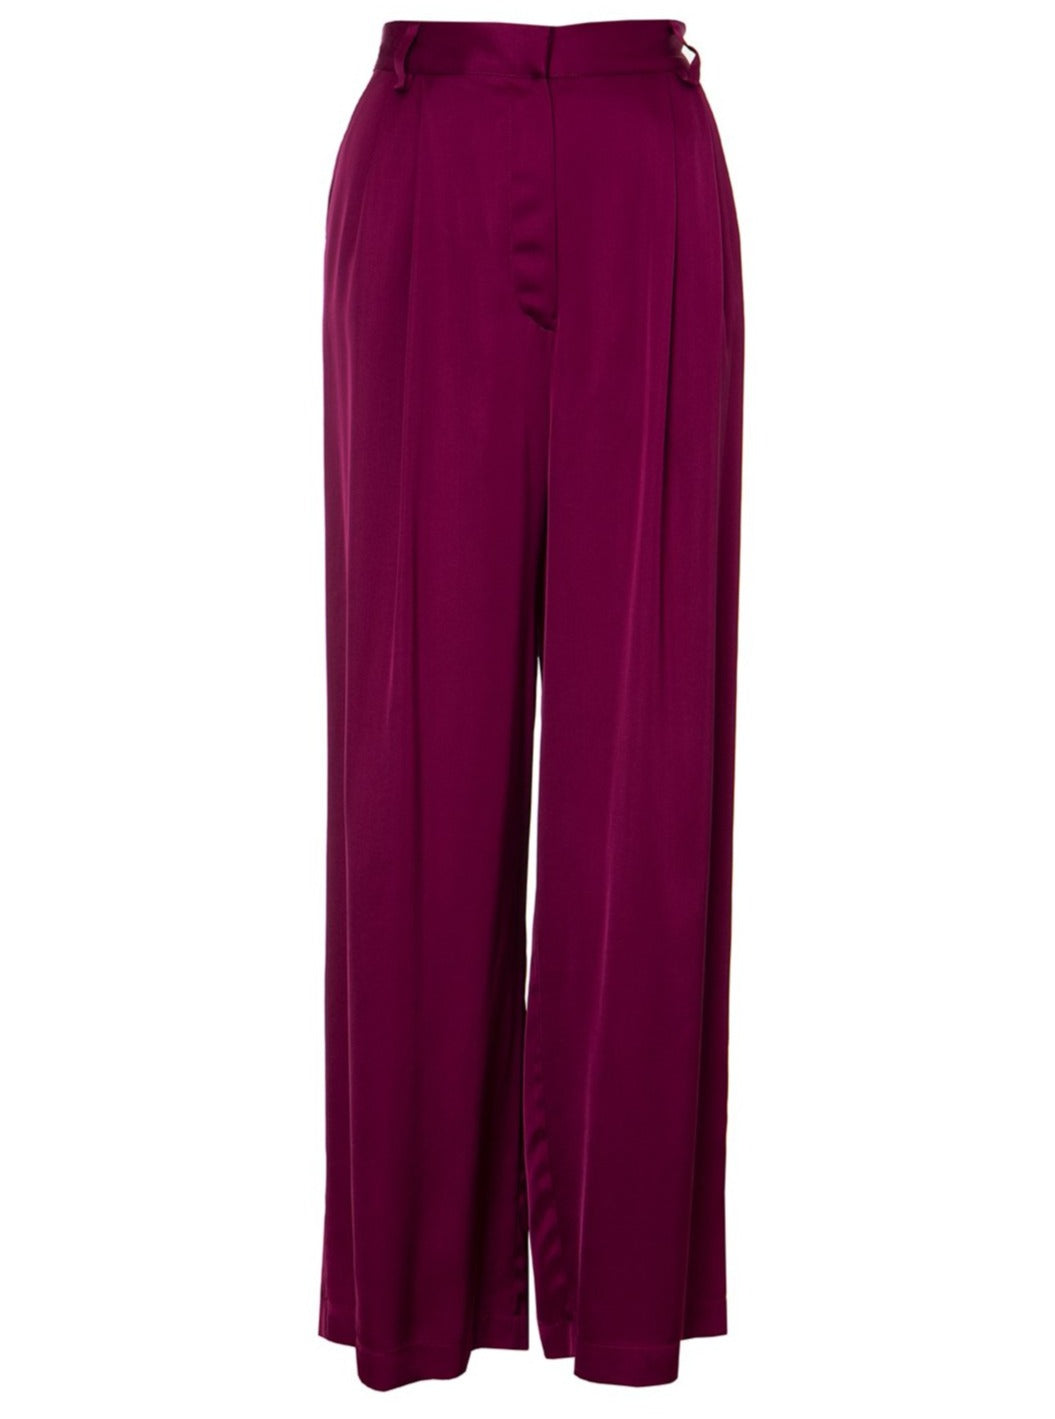 THE CONFIDENCE SUIT PLEATED PANTS - MAGENTA – ROSES ARE RED